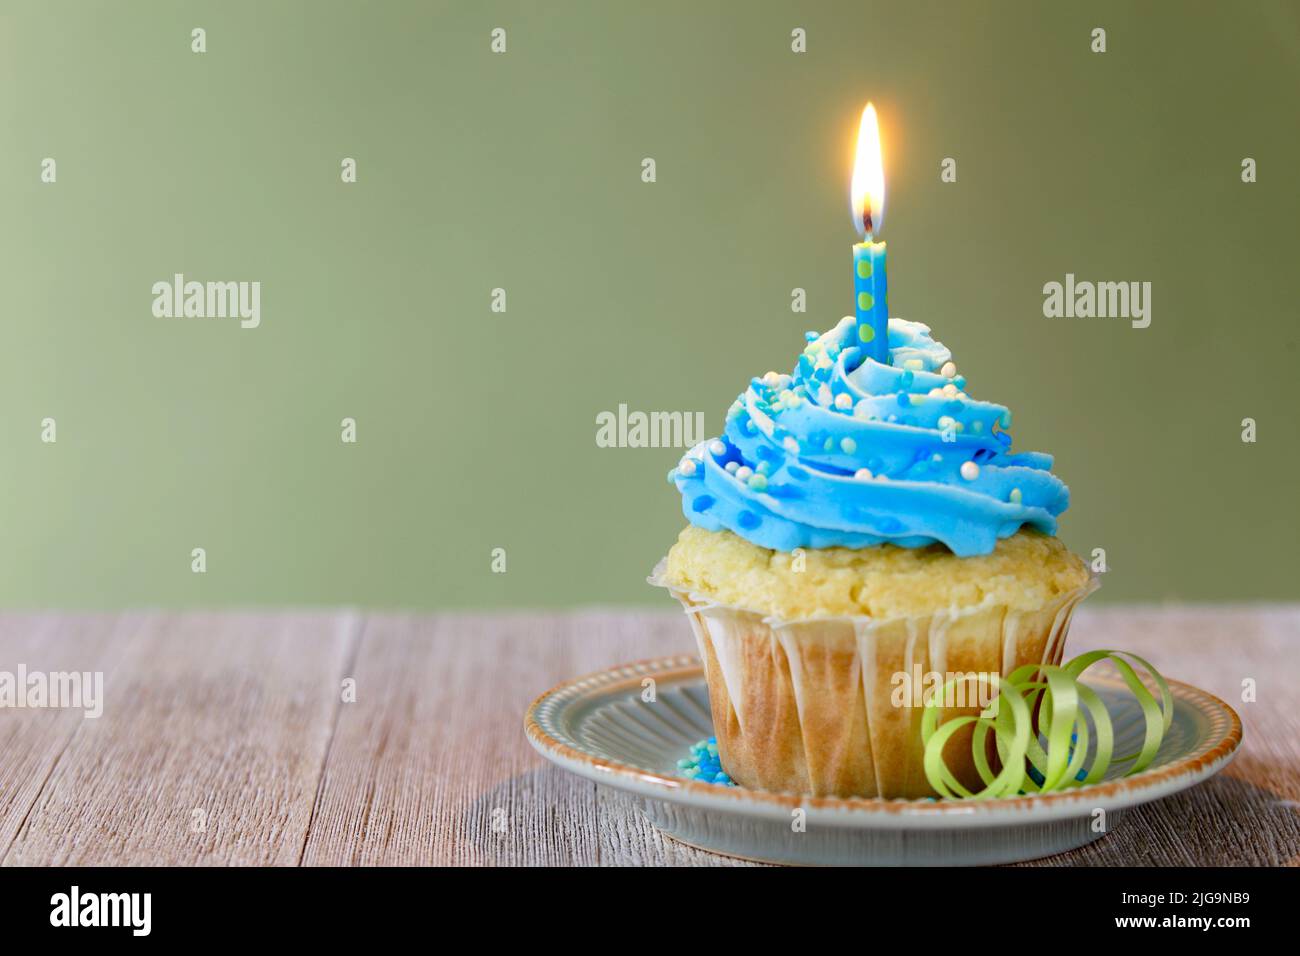 Vanilla cupcake with blue frosting and a blue candle celebrating a Birthday Stock Photo